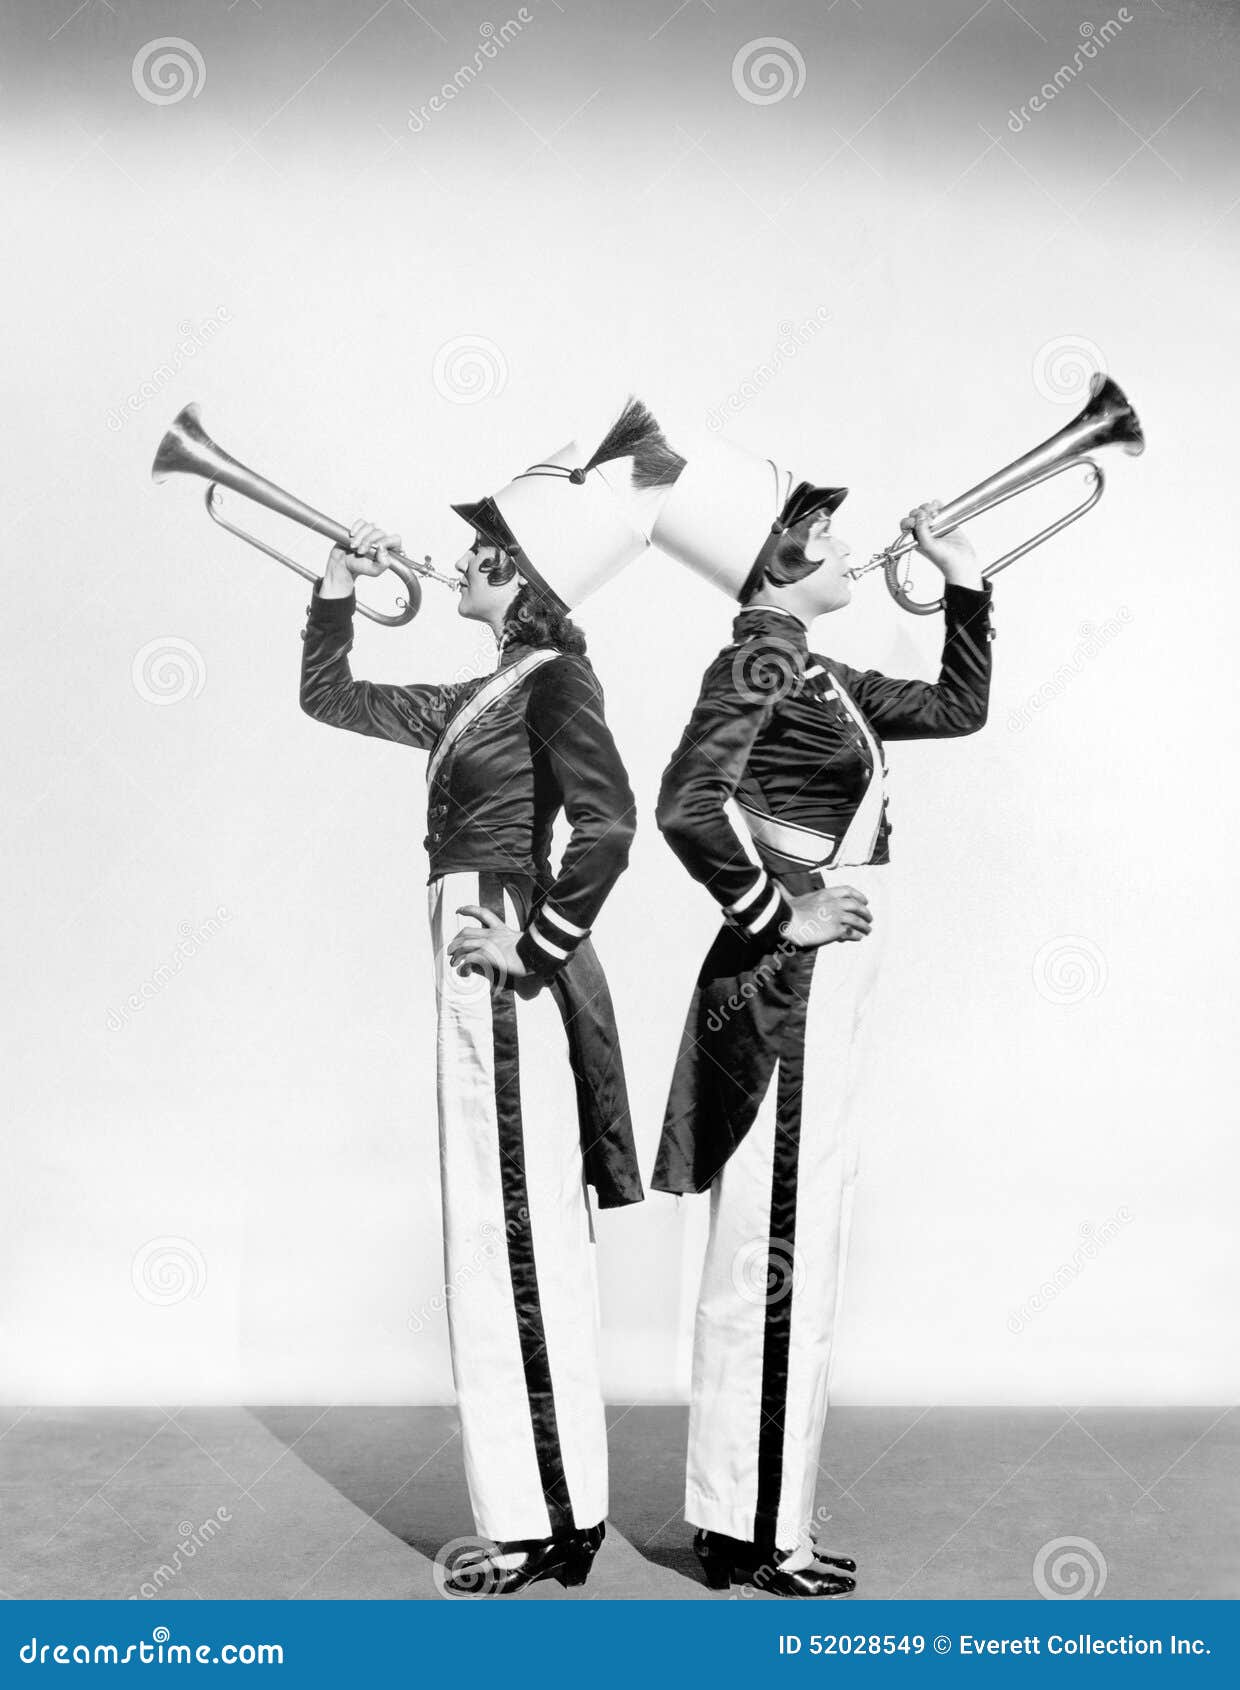 two women in a toy soldier uniforms with trumpets